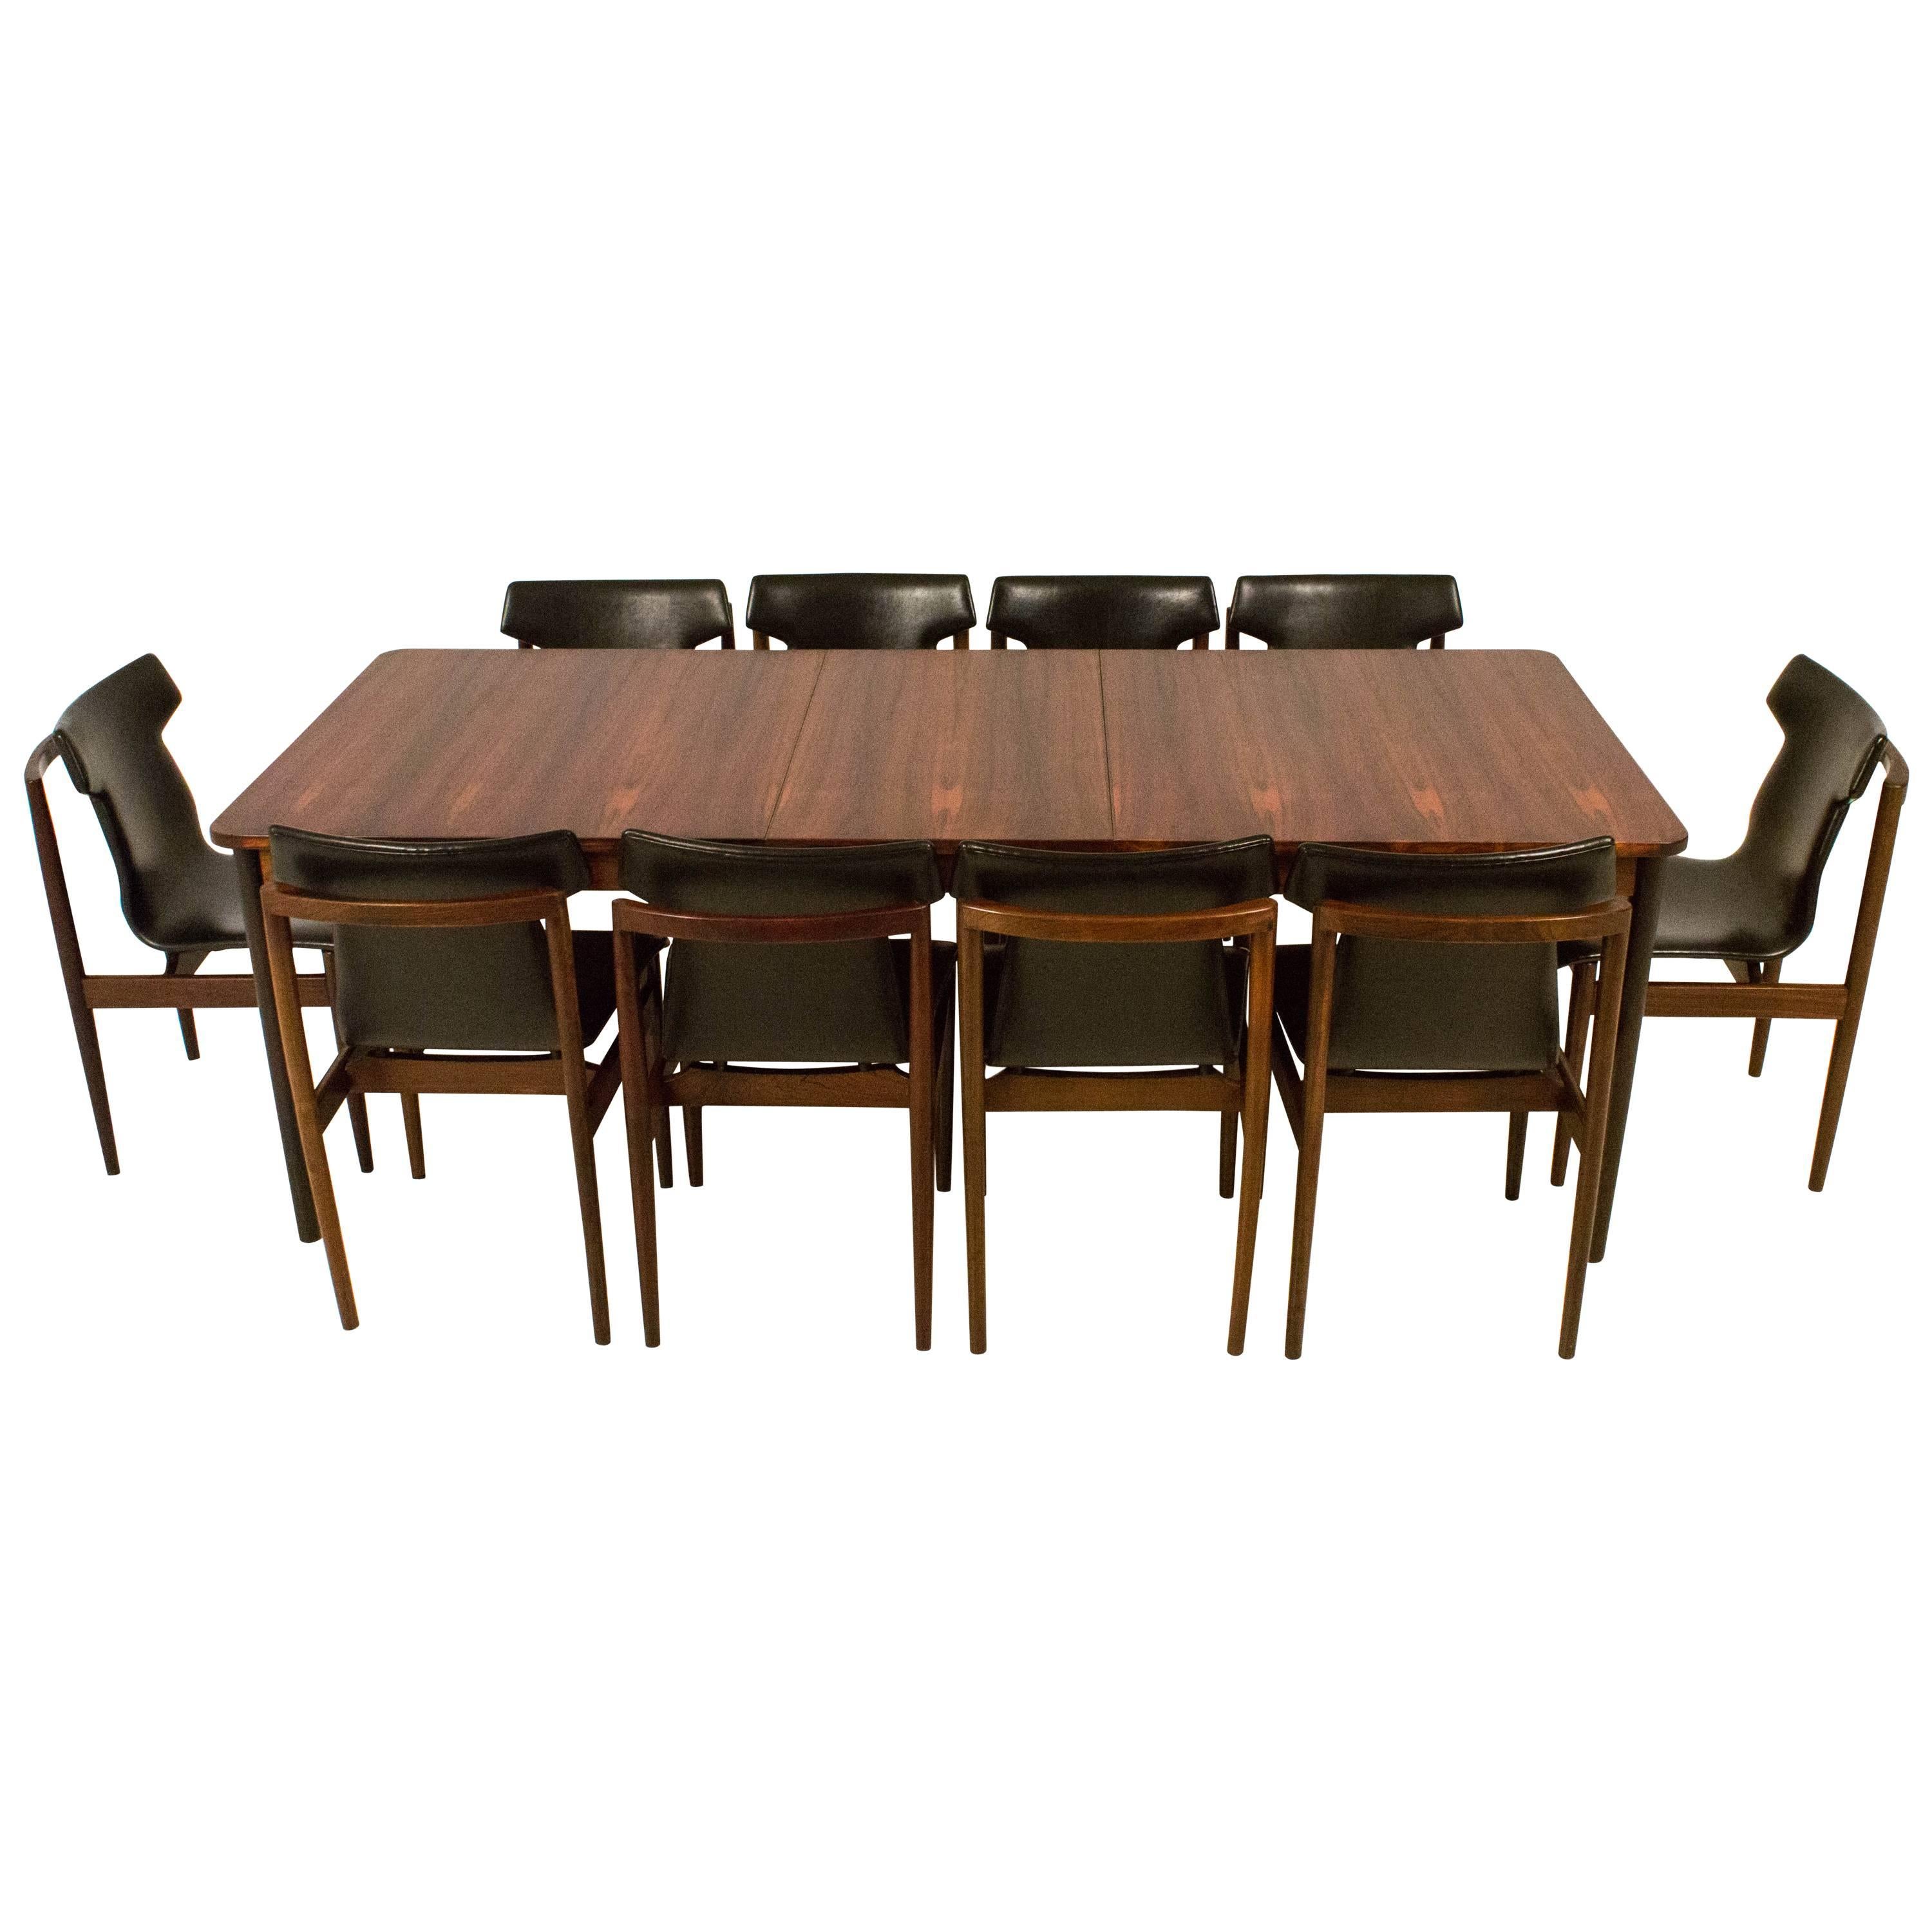 Stunning and Large Mid-Century Modern Extendable Dining Table by Fristho